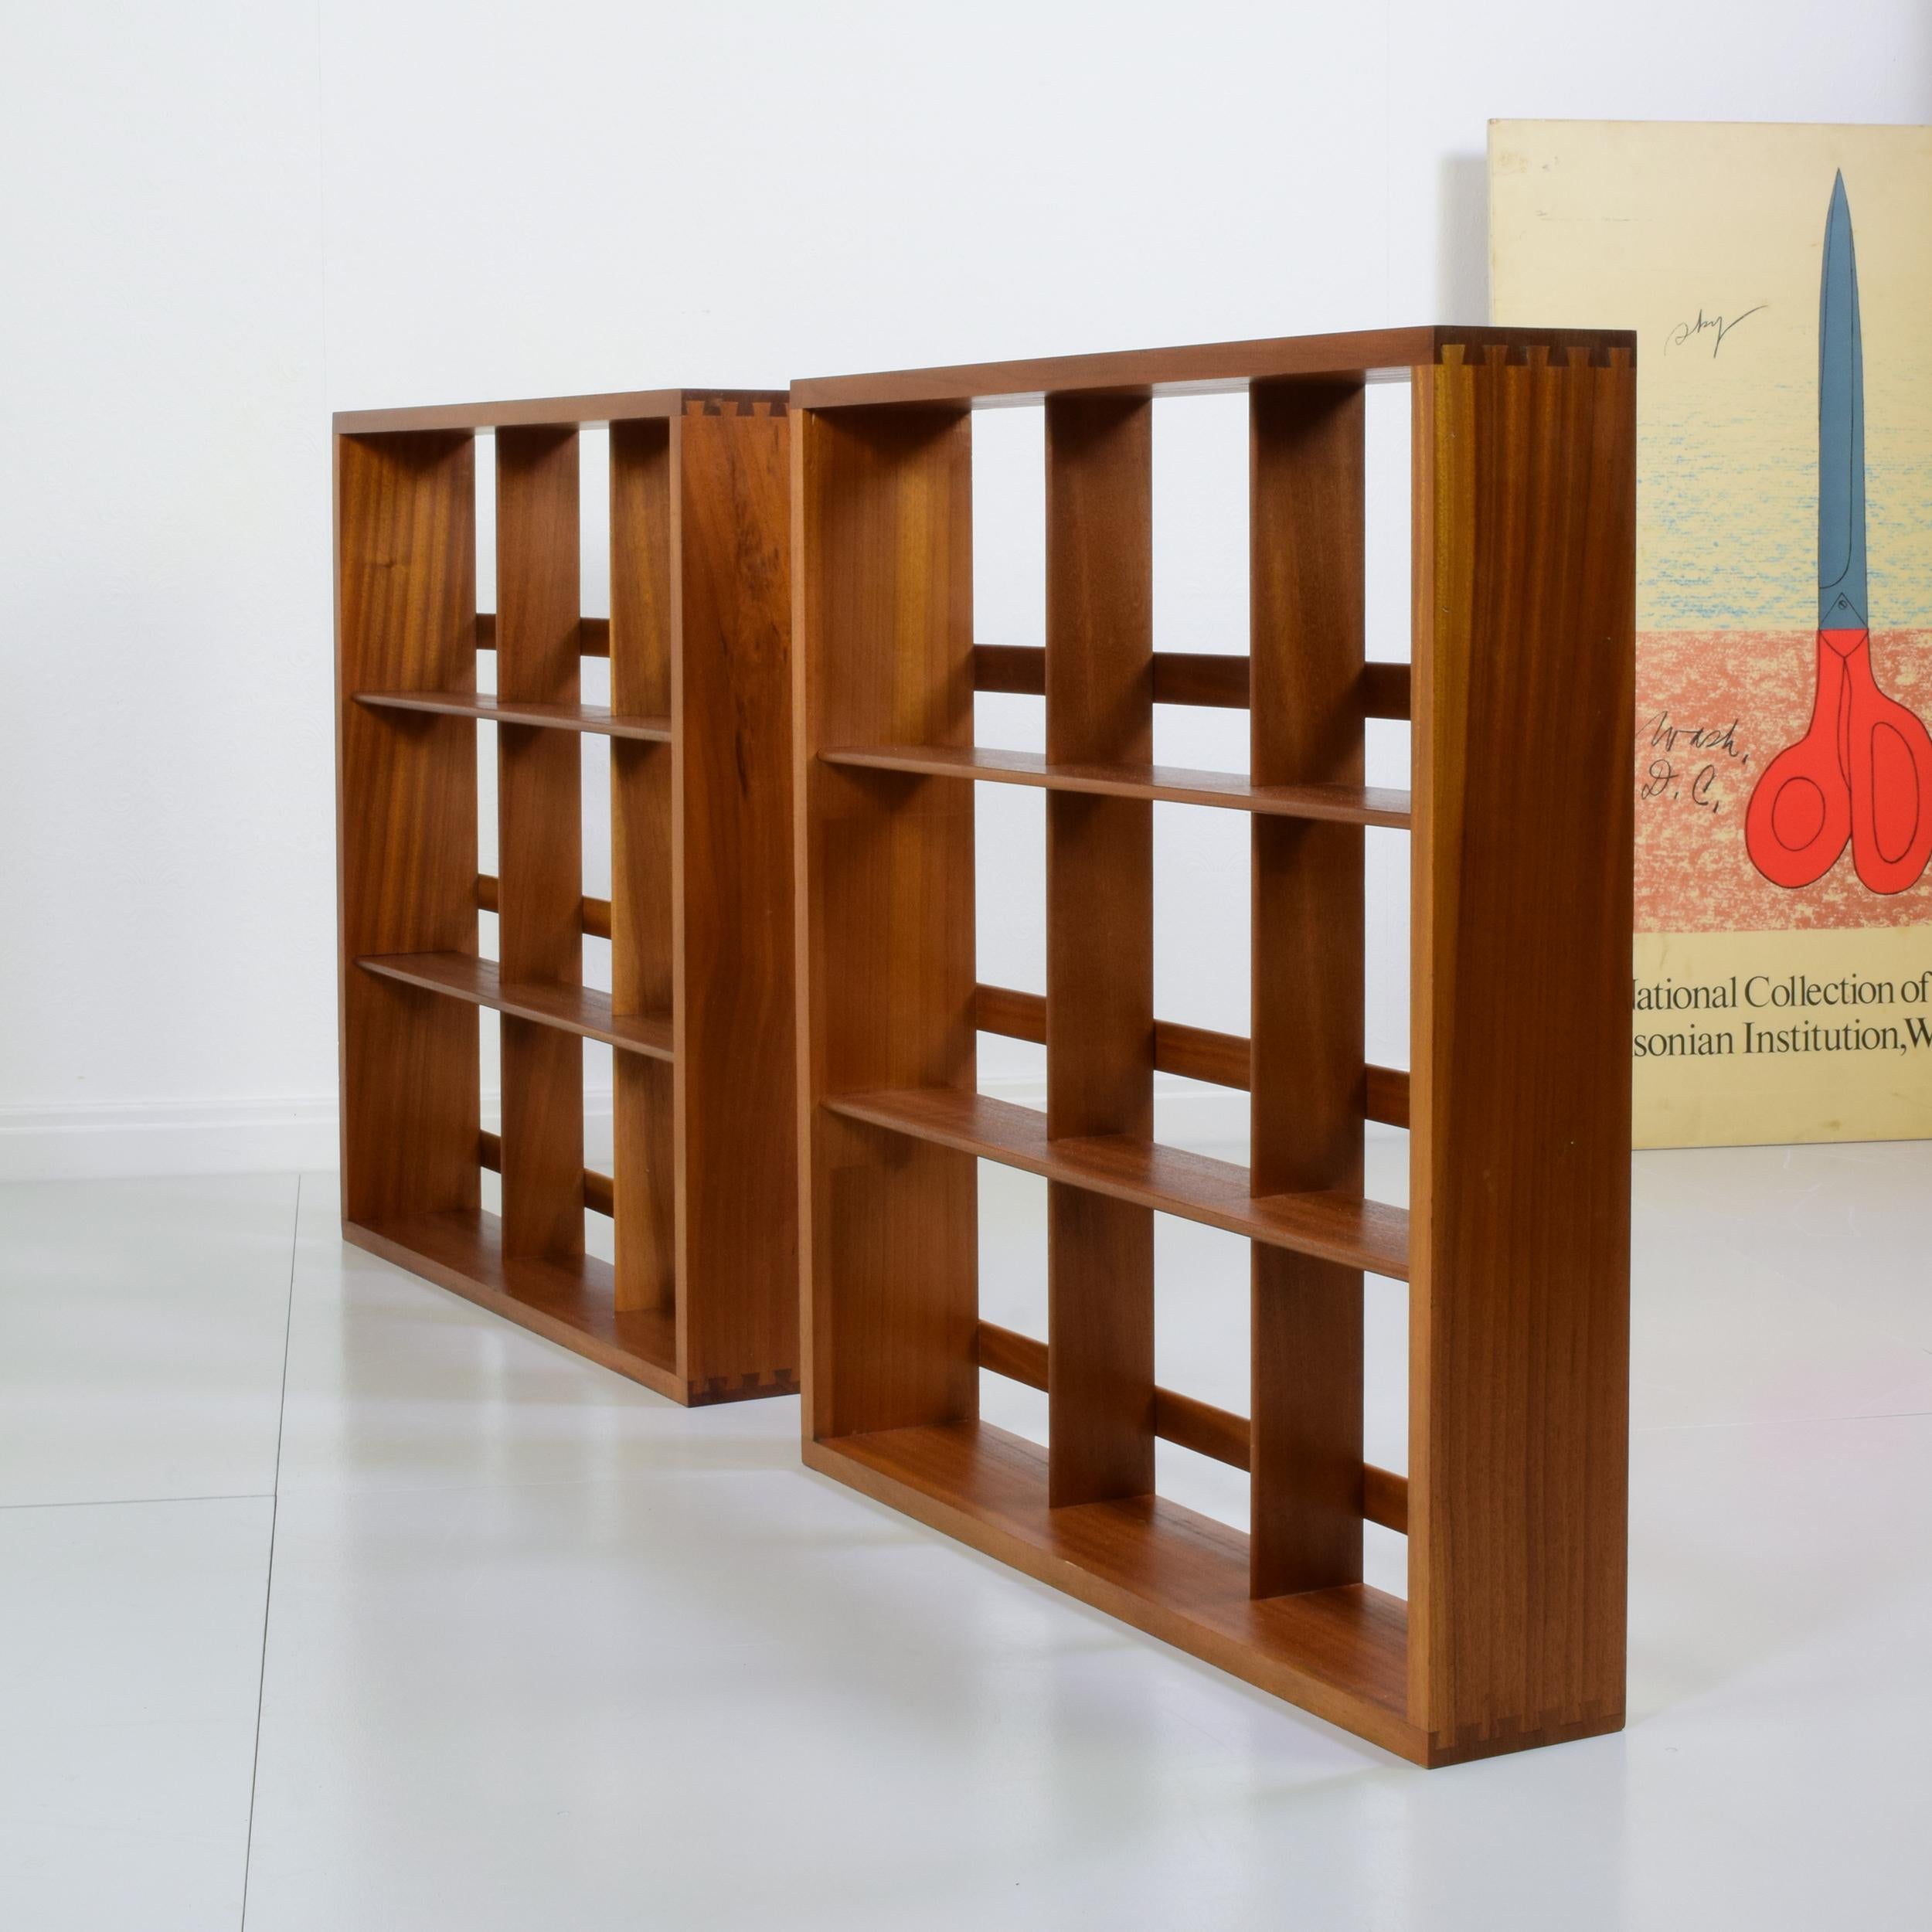 A pair of Beaver and Tapley 'Penguin Bookshelf' units, designed 1956

Classic 1950's shelf units, designed in collaboration with Penguin Books, and dimensioned to fit the books perfectly.

These can be either floor-standing or wall-hung. These